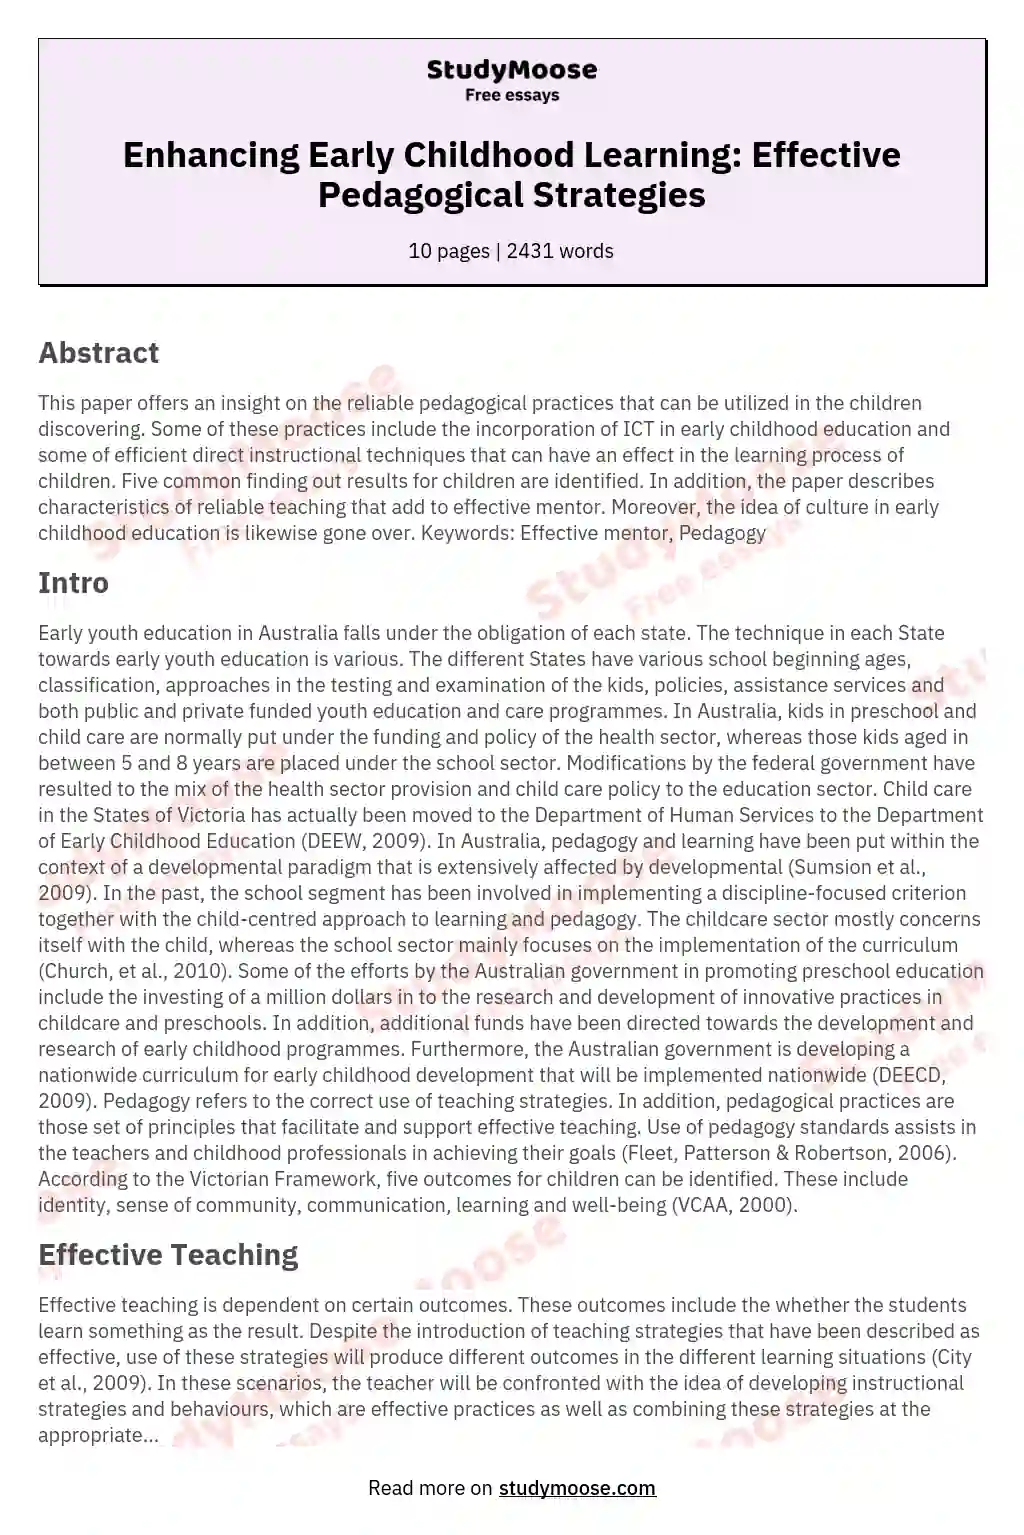 Enhancing Early Childhood Learning: Effective Pedagogical Strategies essay